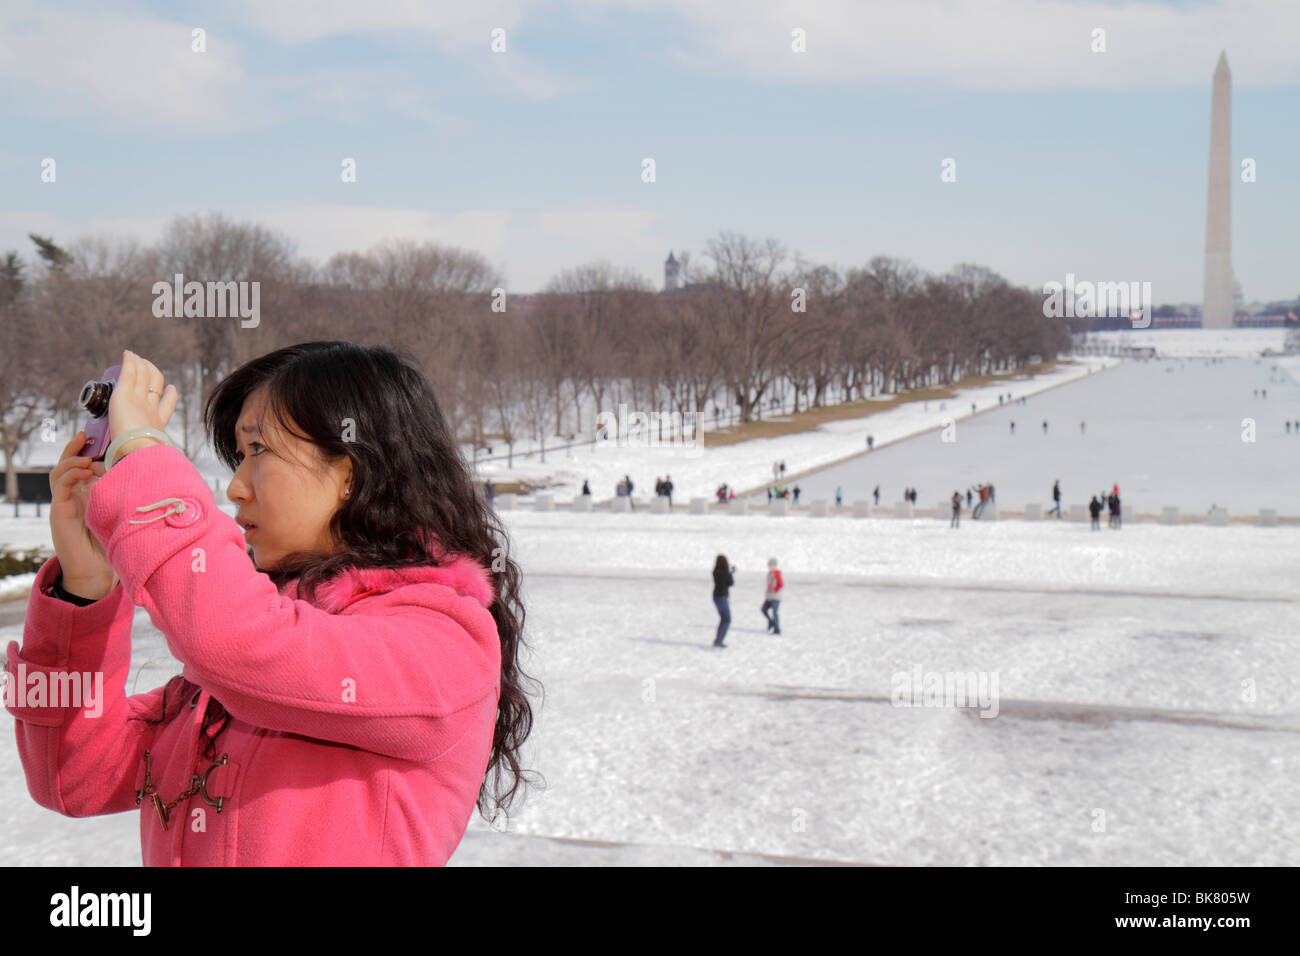 Washington DC Washingto,D.C.,West Potomac Park,National Mall and Memorial Parks,The Reflecting Pool,View of Washington Monument,History,Frozen,ICE,sno Banque D'Images